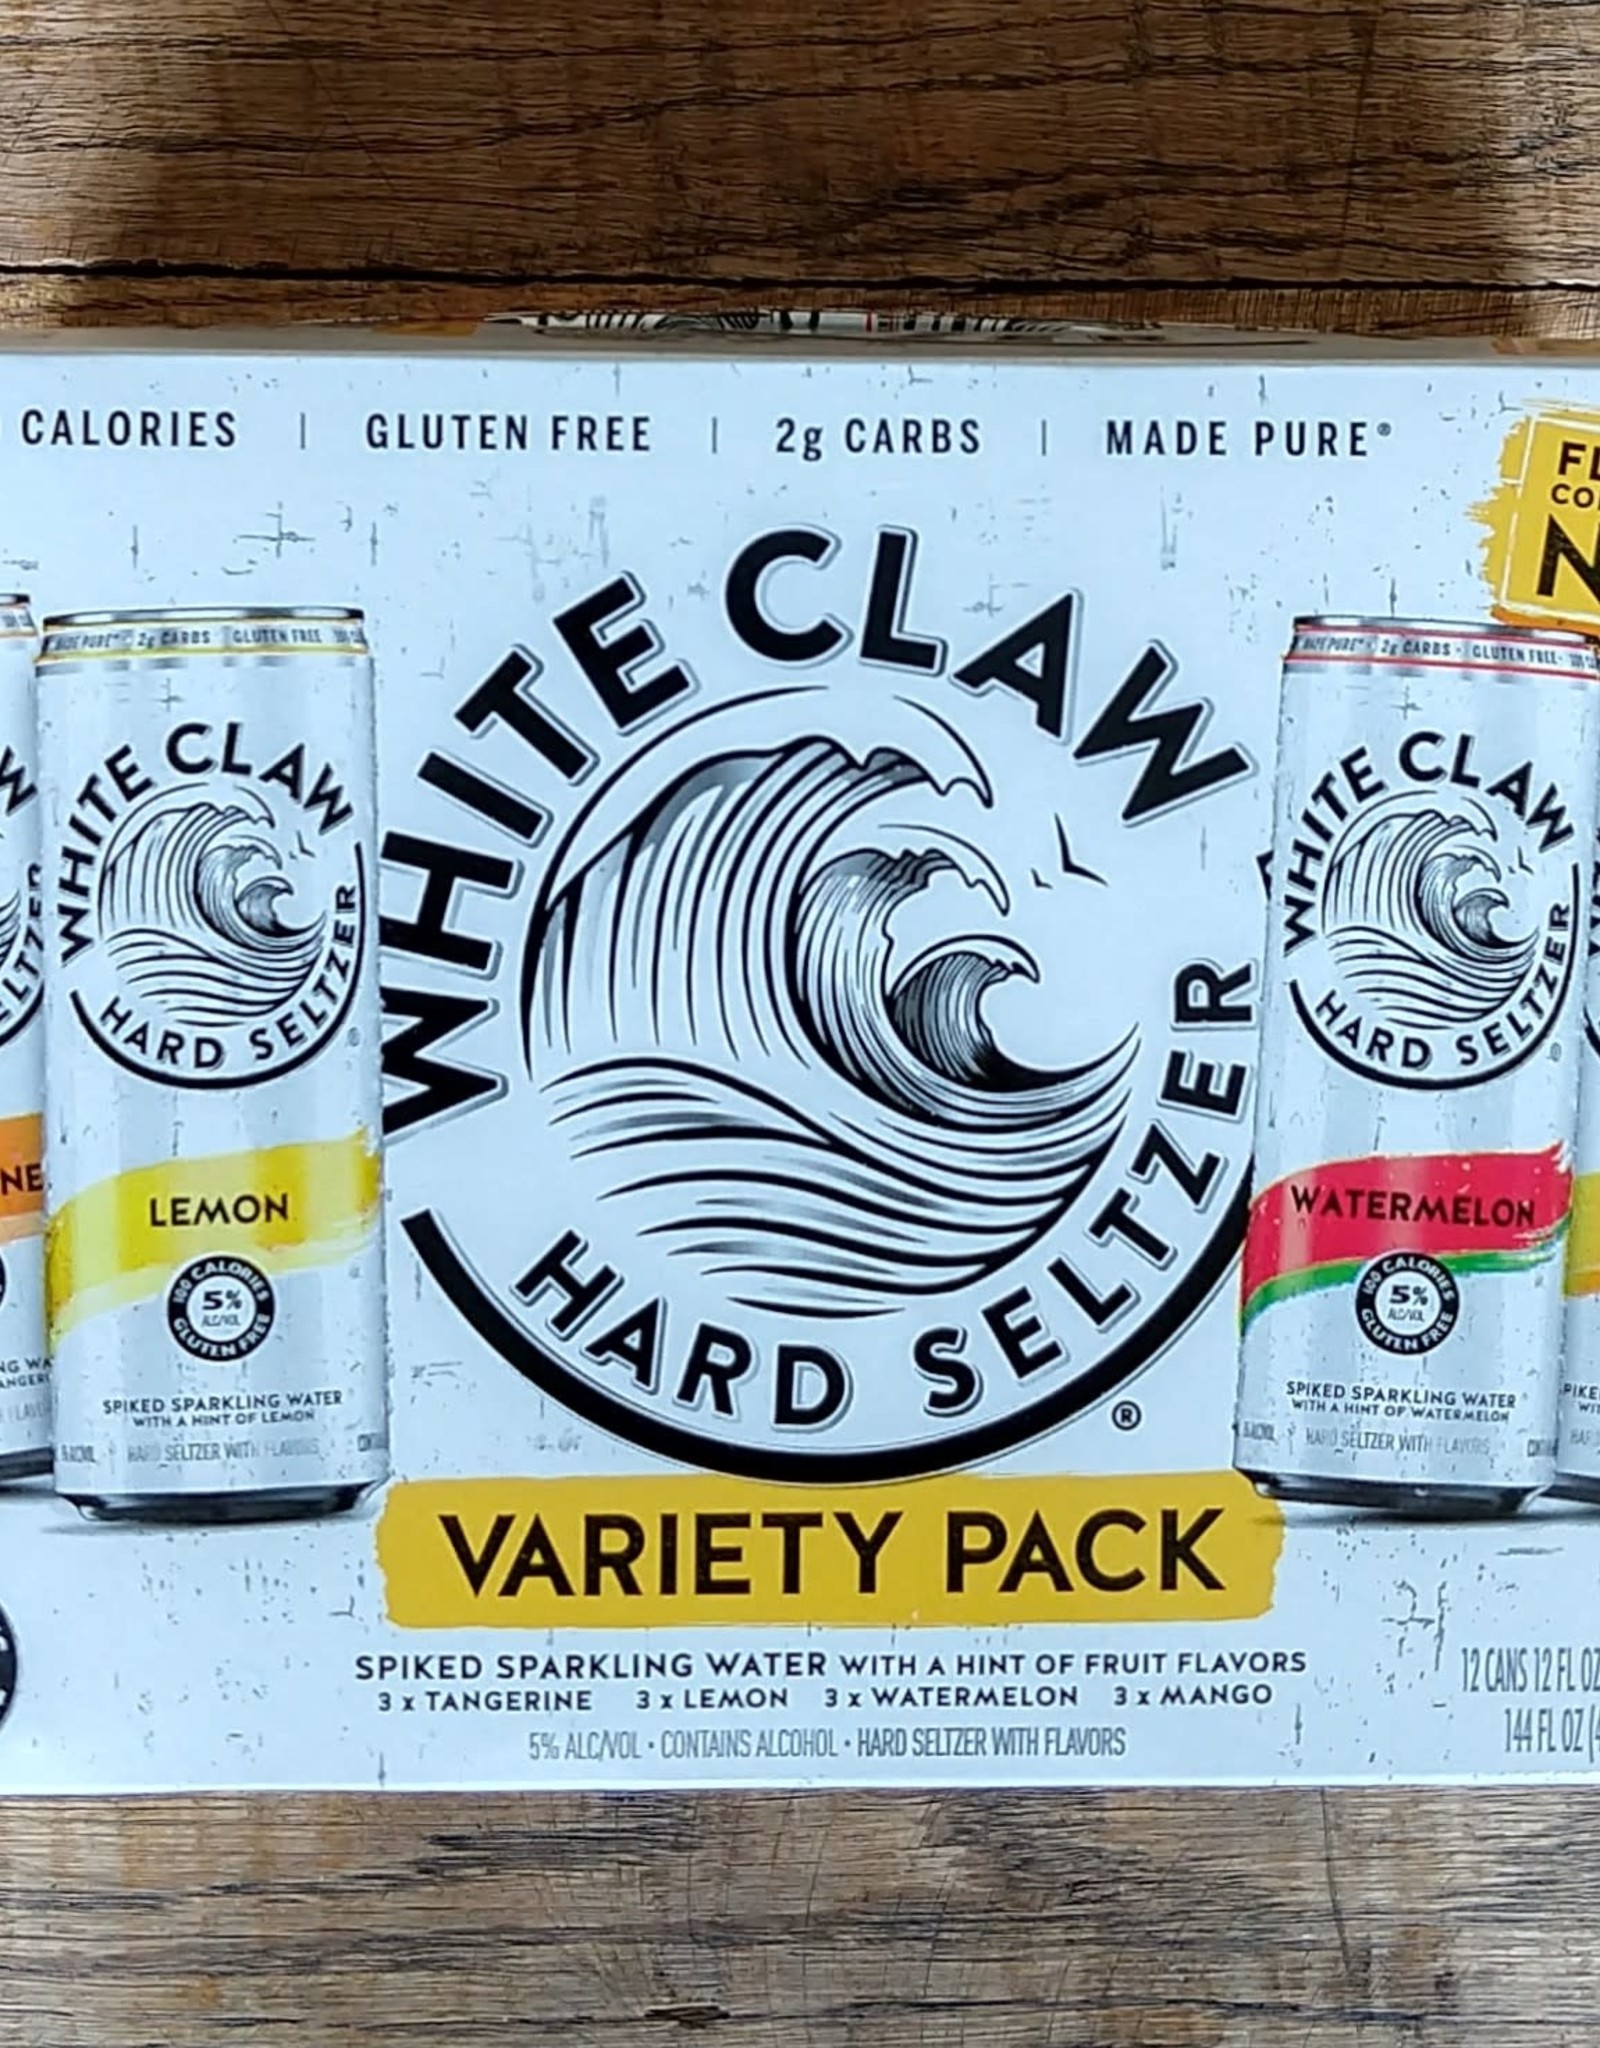 White Claw Hard Seltzer 12 PACK White Claw Hard Seltzer Variety Pack #2